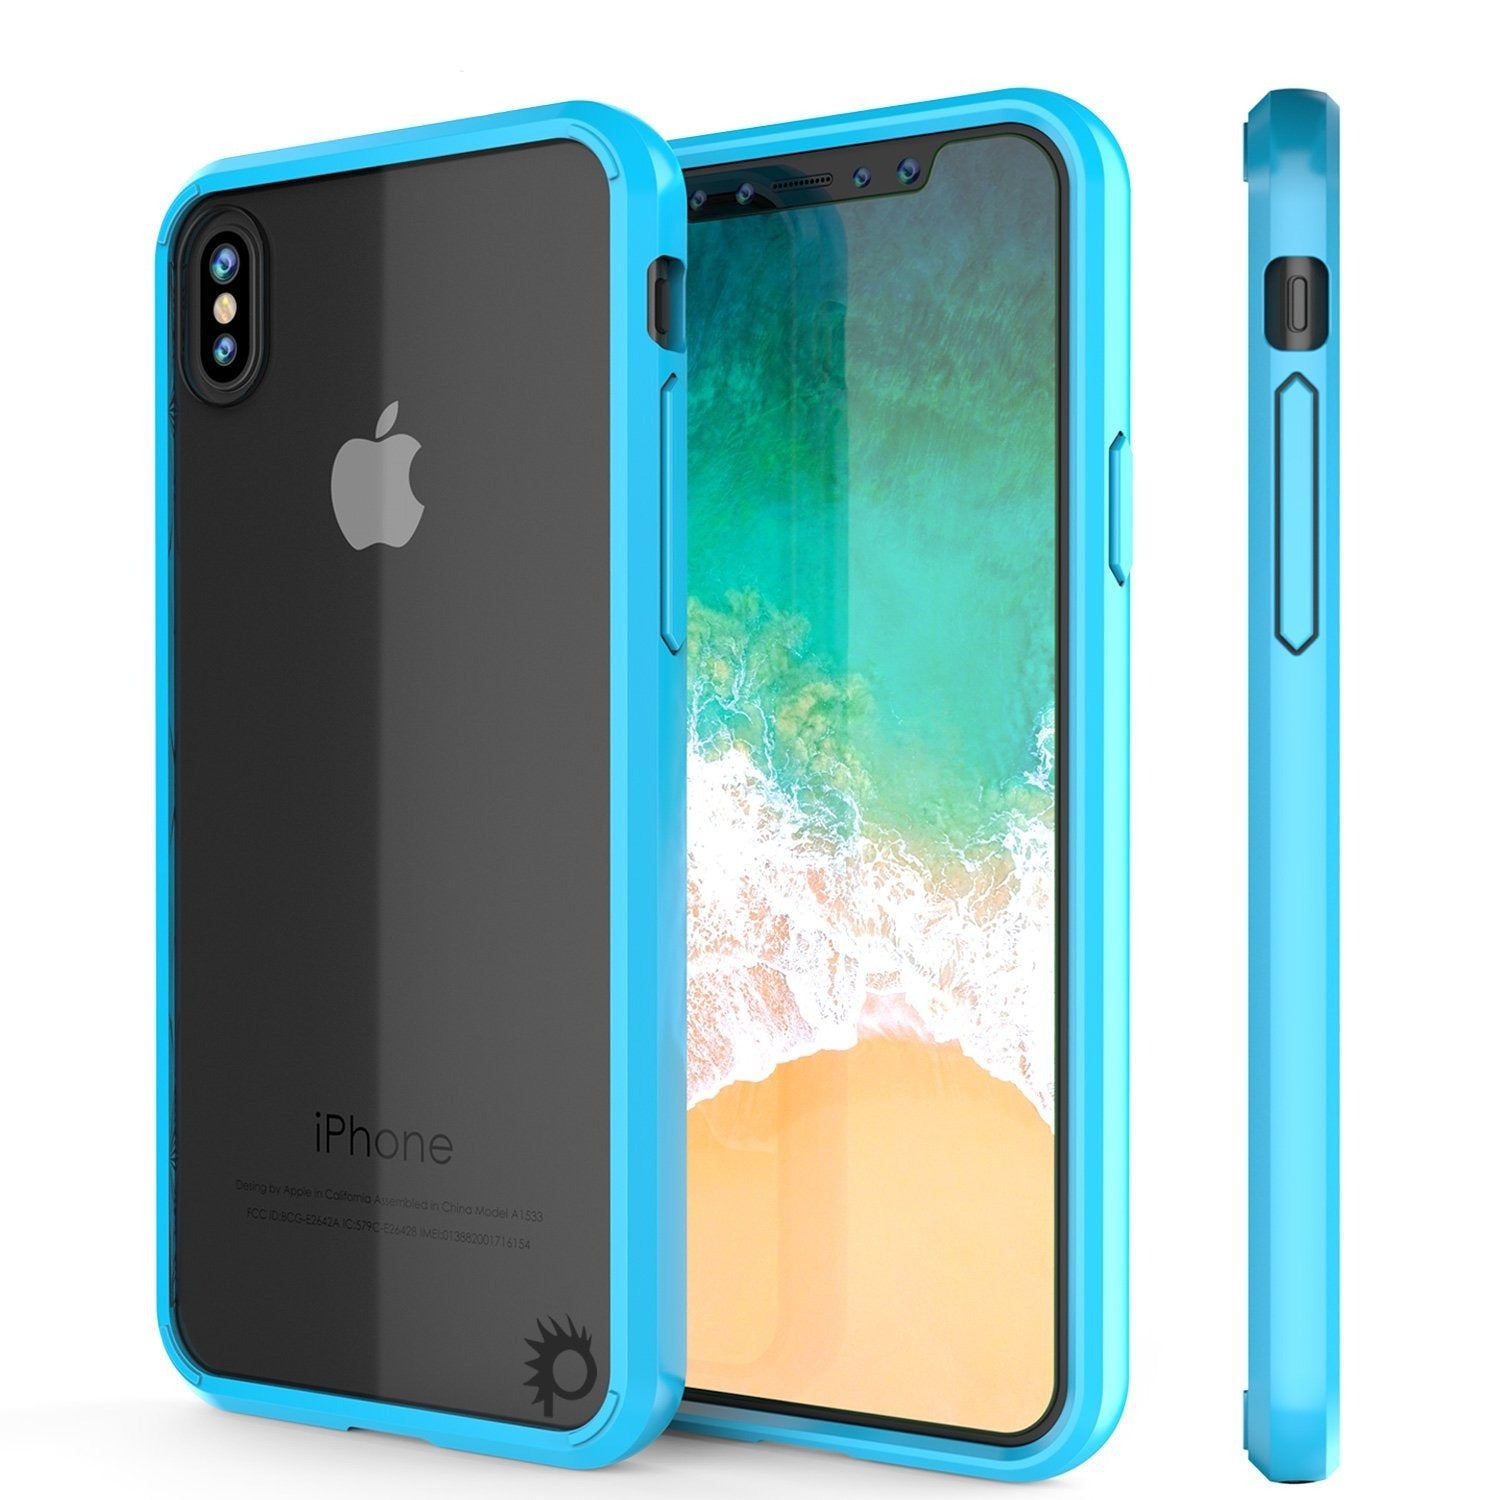 iPhone XS Max Case, PUNKcase [Lucid 2.0 Series] [Slim Fit] Armor Cover [Light-Blue]